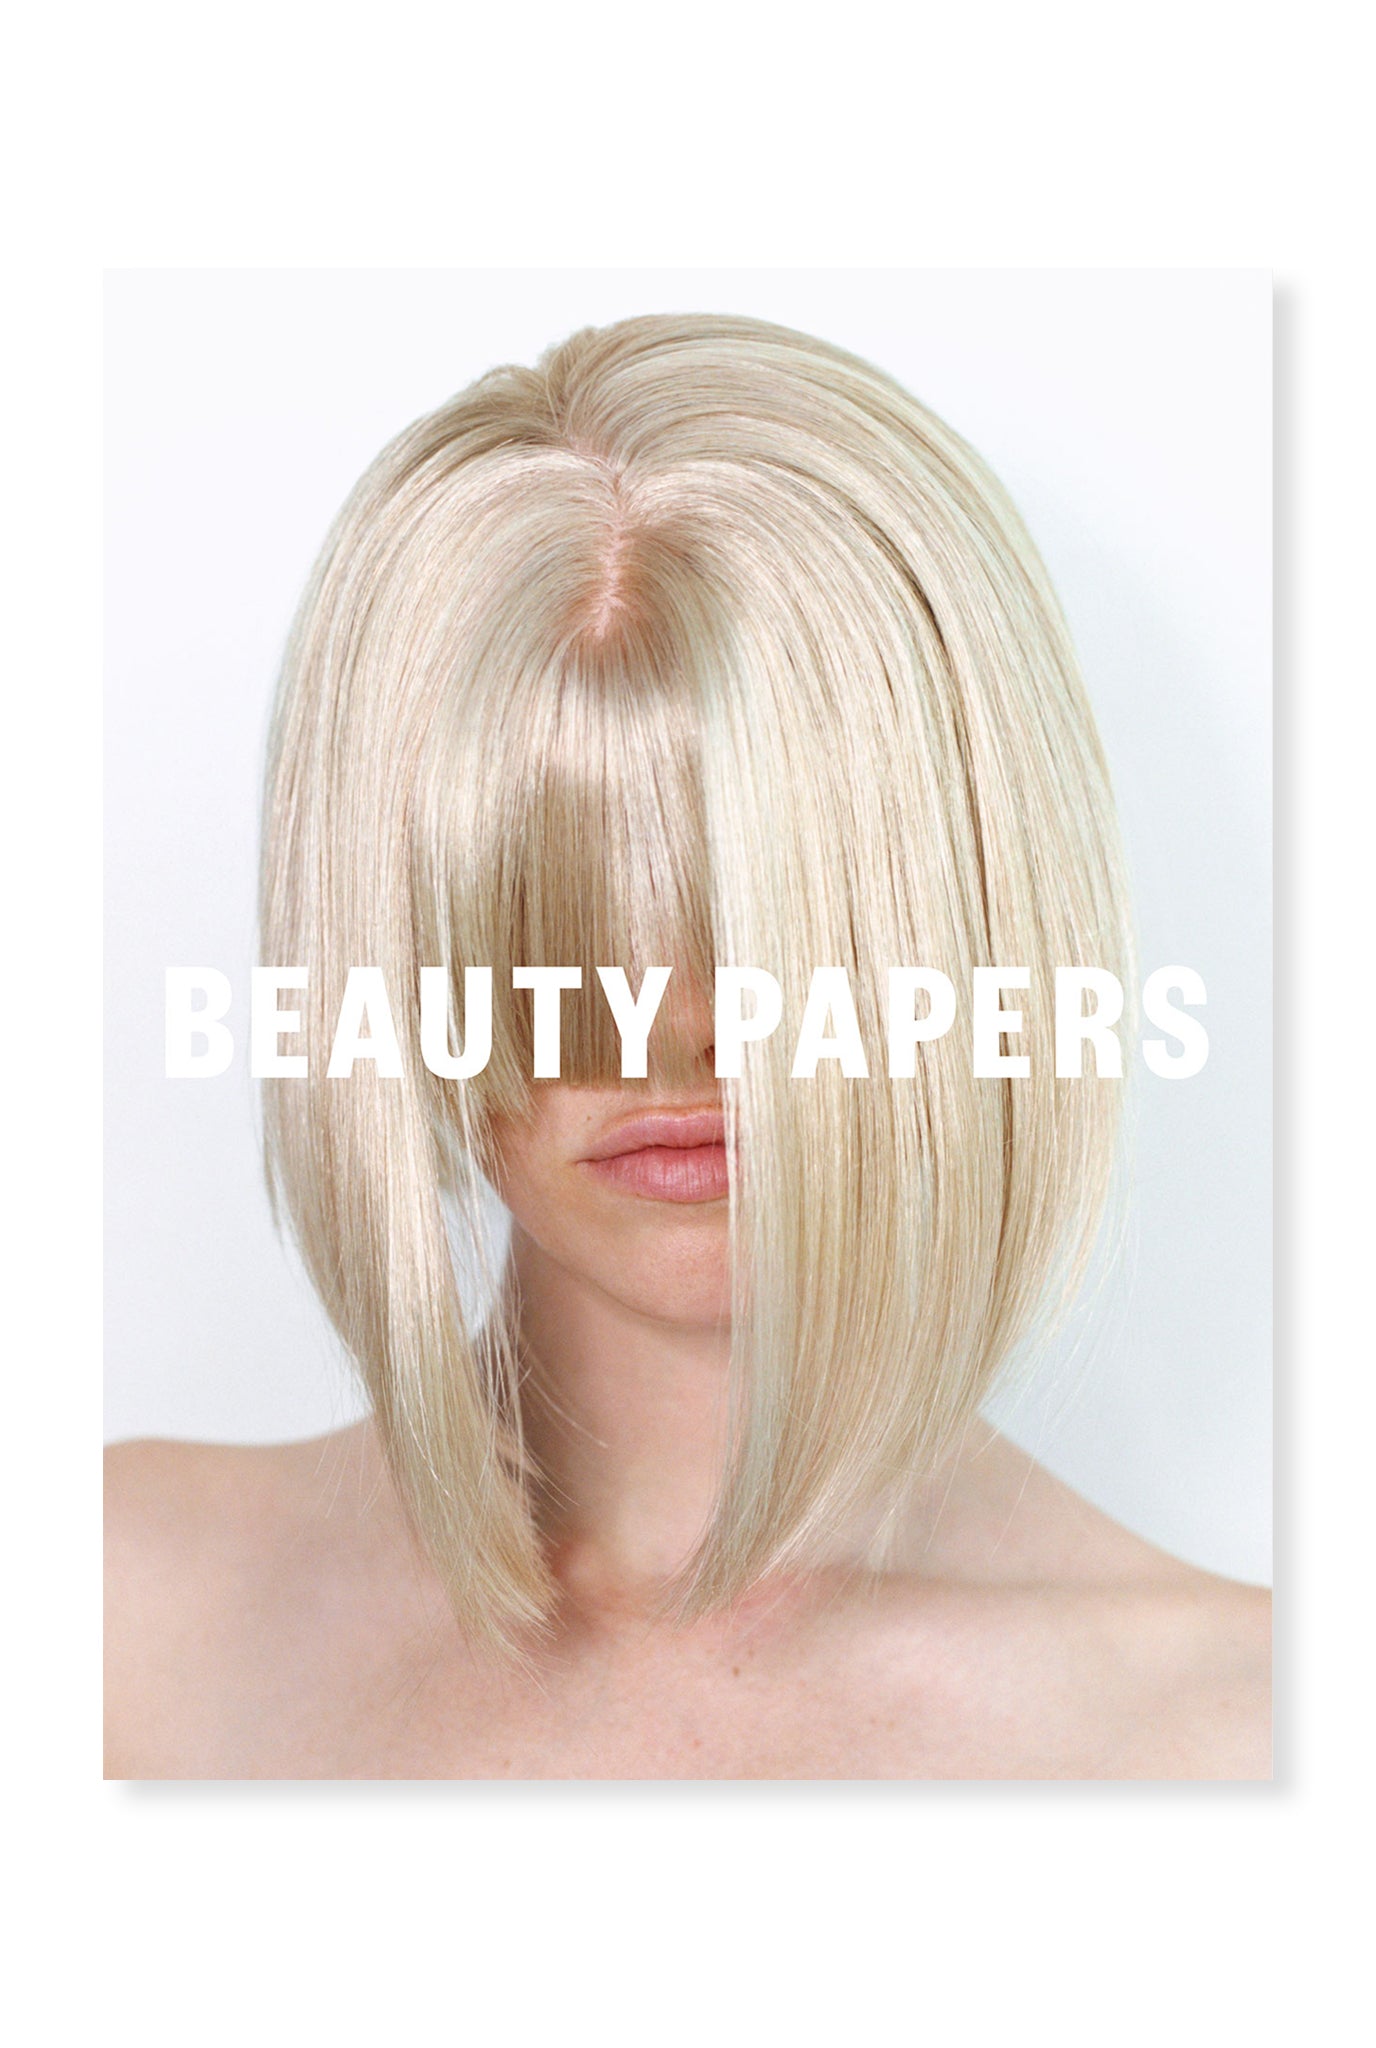 Beauty Papers, Issue 10